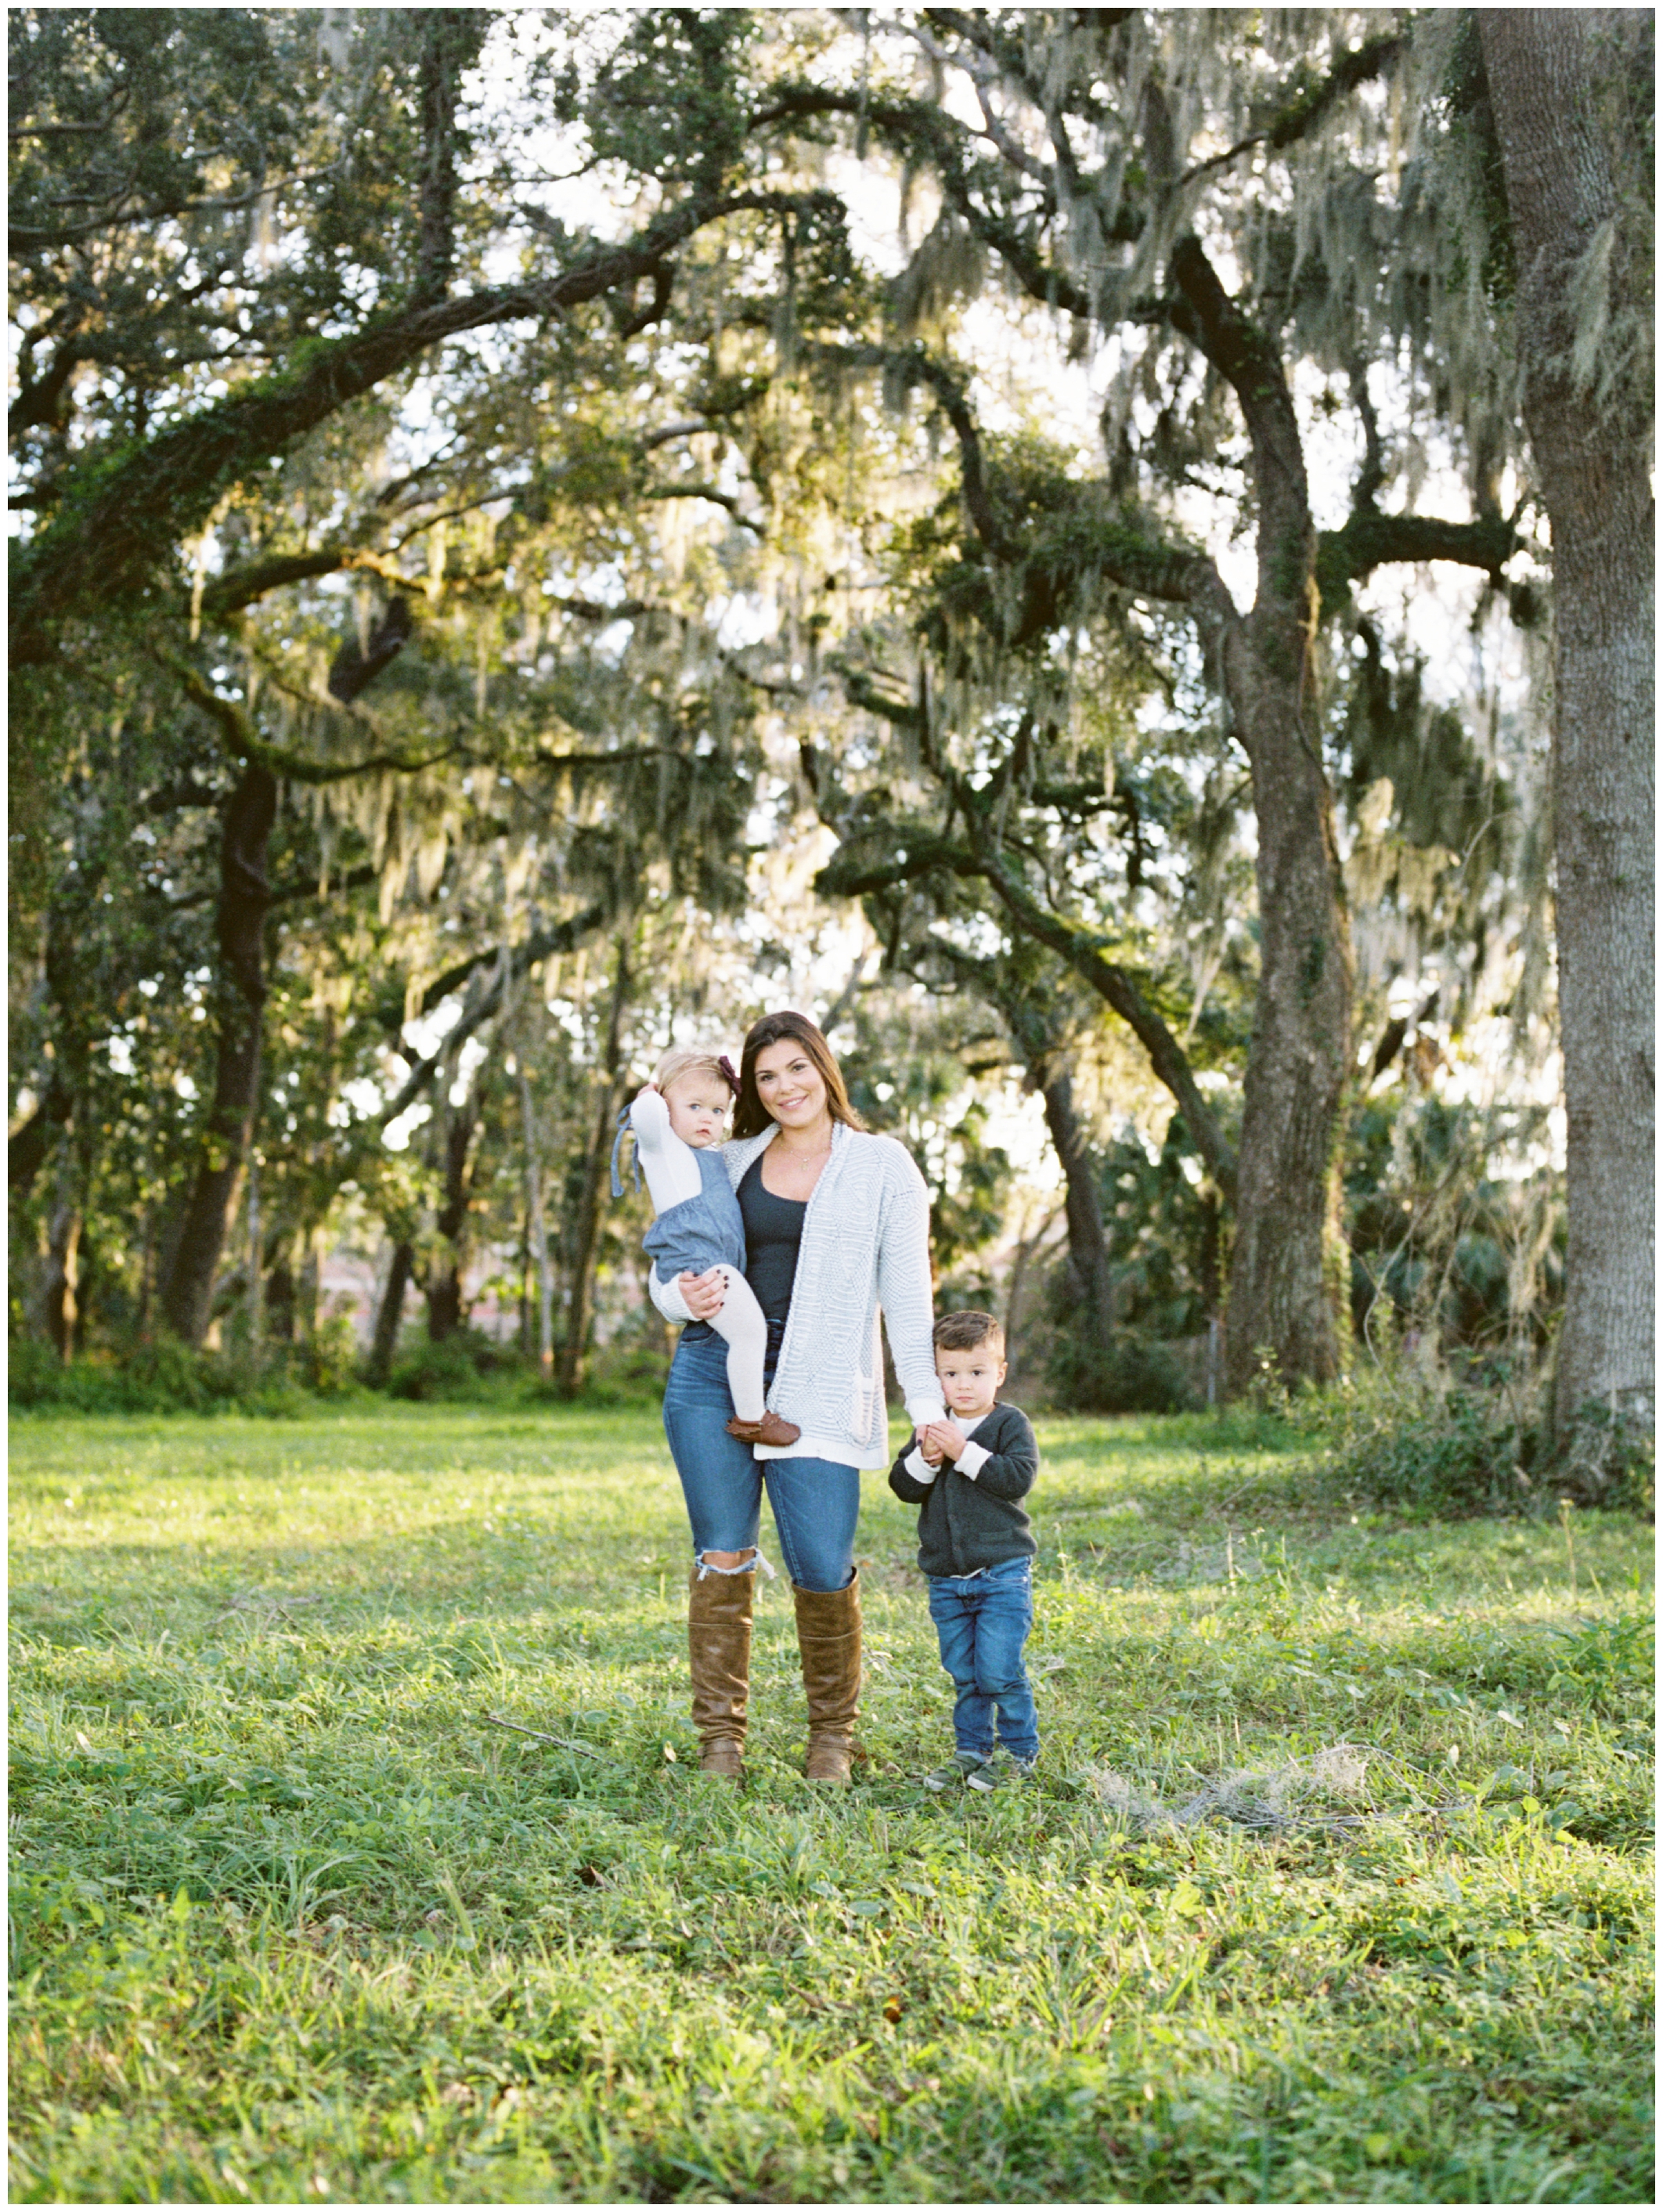 Lisa Silva Photography- Ponte Vedra Beach, St. Augustine and Jacksonville, Florida Fine Art Film Destination Wedding Photography- Family Lifestyle Session in St. Augustine_0010.jpg